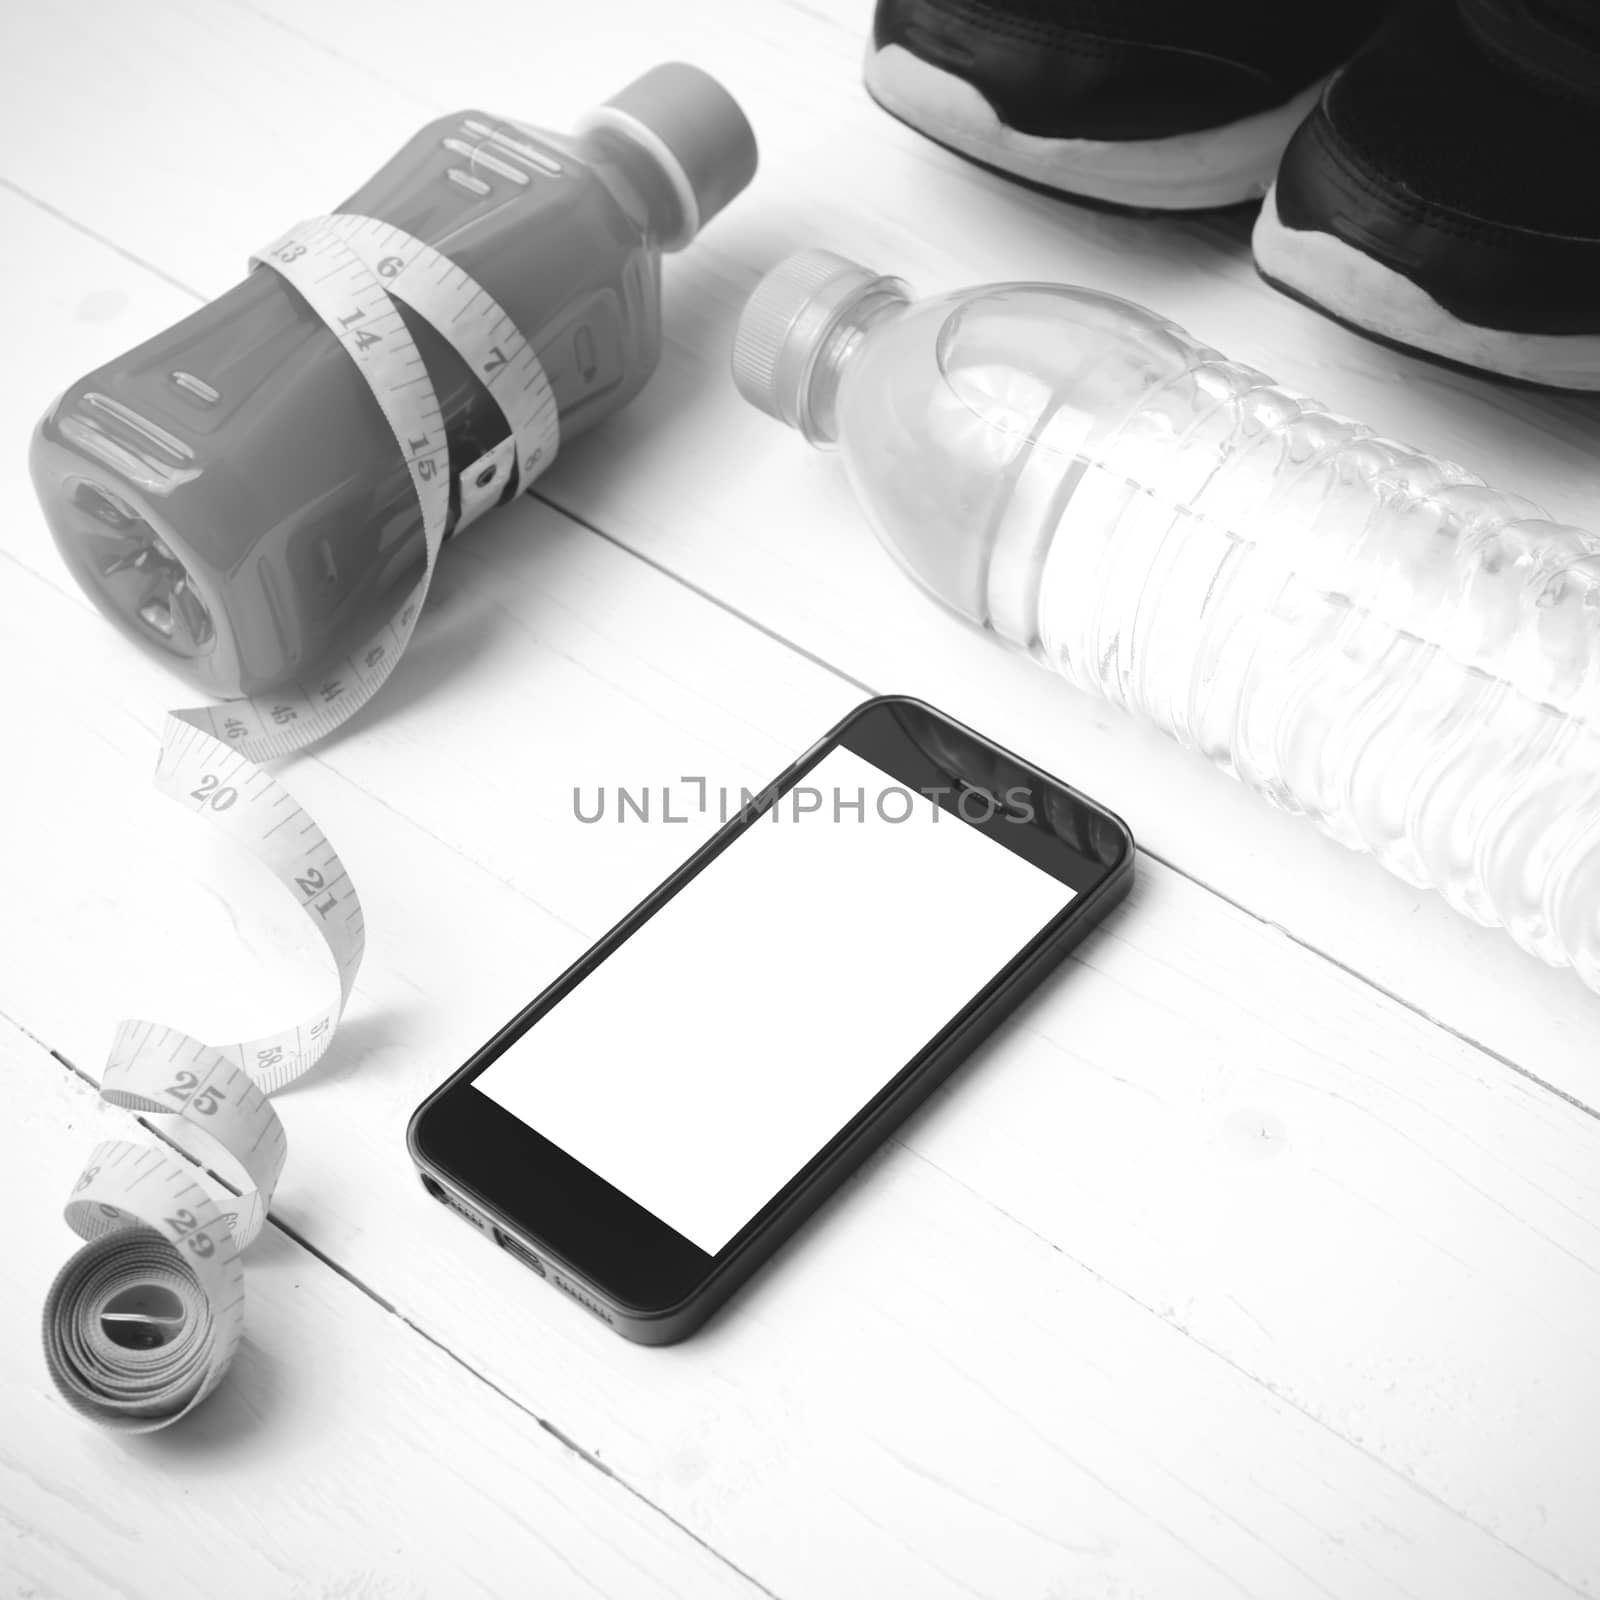 fitness equipment:running shoes,measuring tape,water,juice and phone on white wood background black and white color